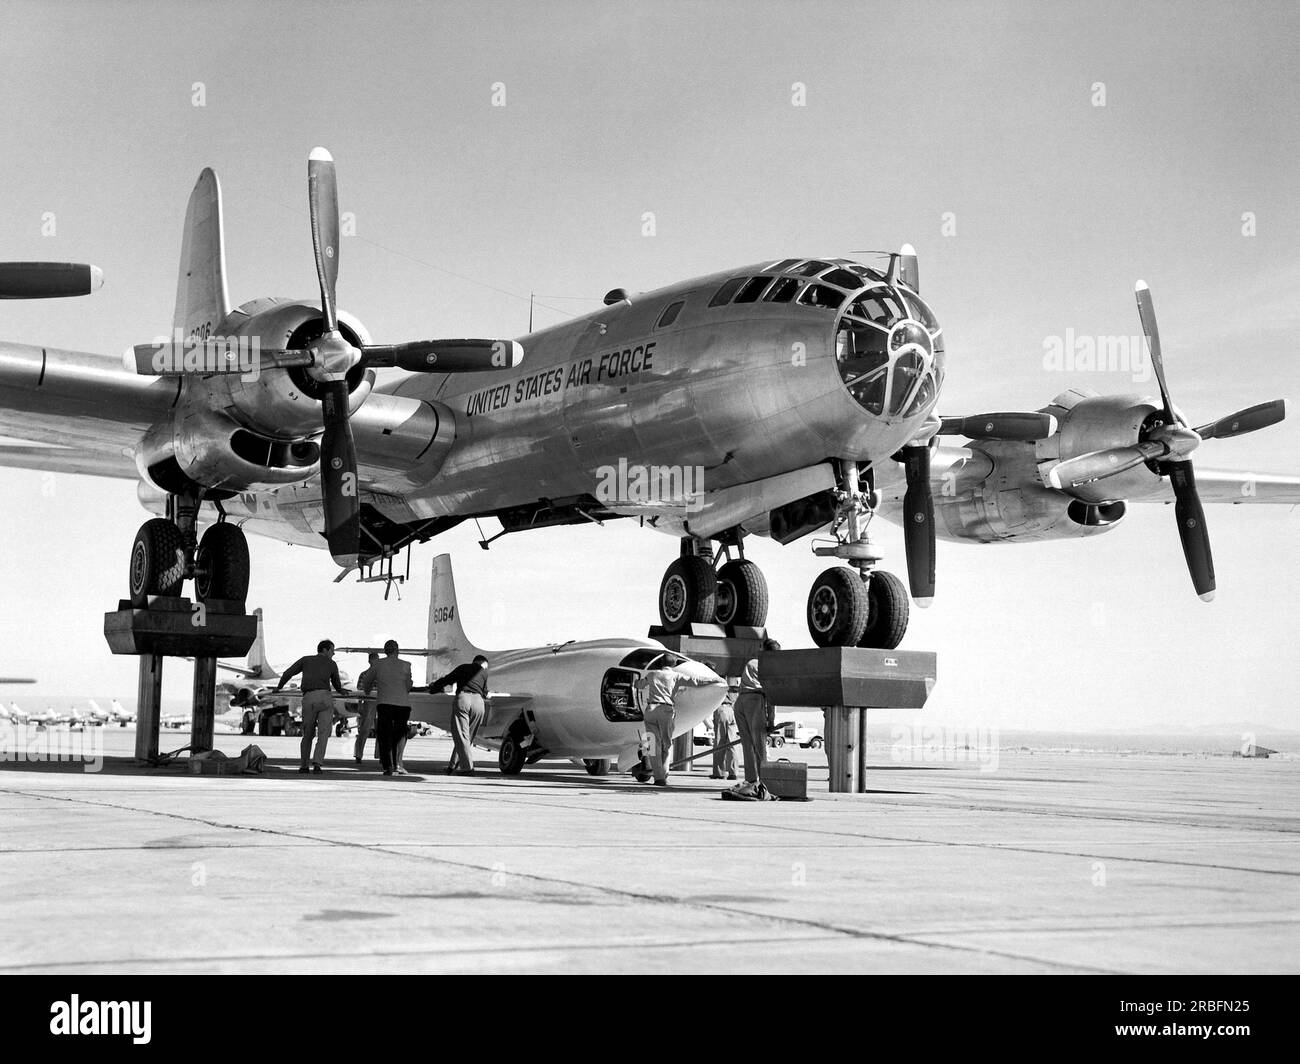 Edwards Air Force Base, California:  November 9, 1951 Bell X-1-3 being mated to the B-50 mothership for a captive flight test.  While being de-fueled after this flight it exploded, destroying itself and the B-50, and seriously burning Bell test pilot Joe Cannon. The X-1-3 had completed only a single glide-flight on July 20. Stock Photo